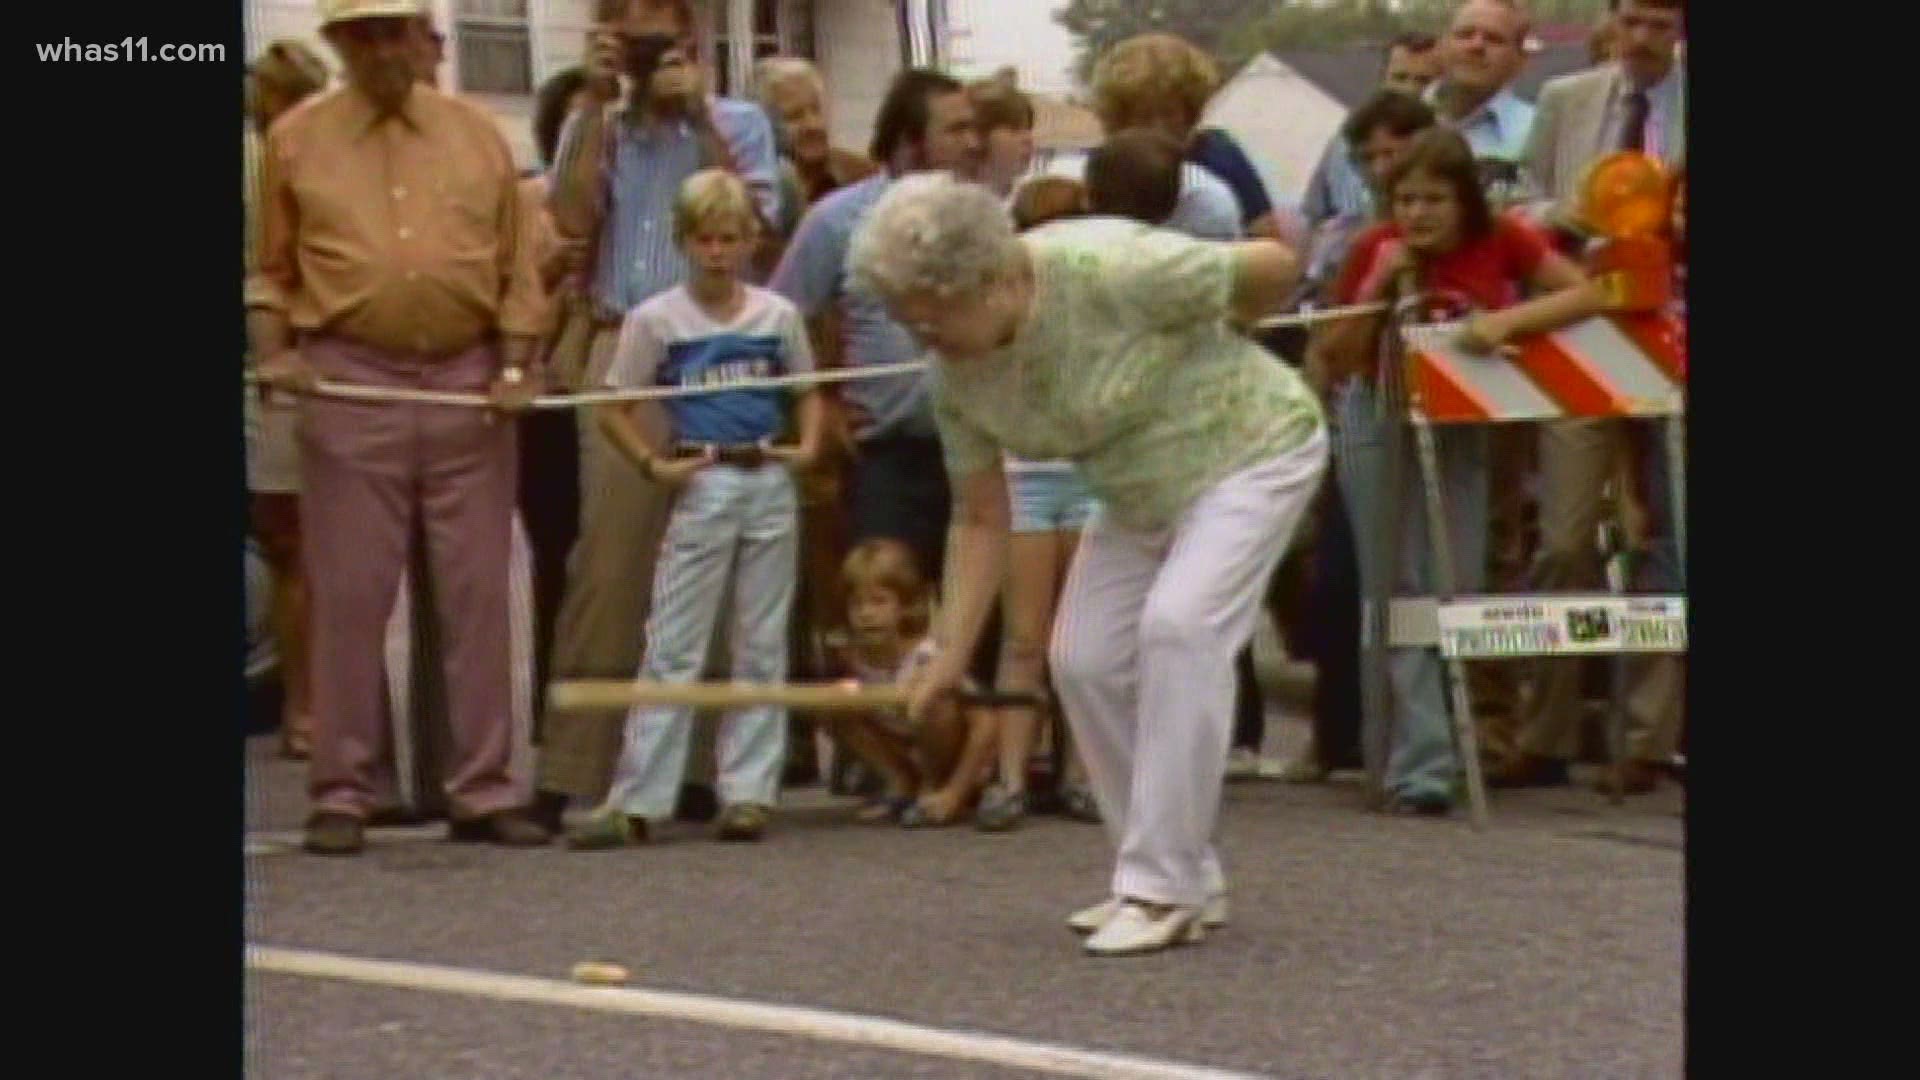 It's a German street game and a cherished tradition in Louisville's Schnitzelburg neighborhood every year. Here's how the game began.